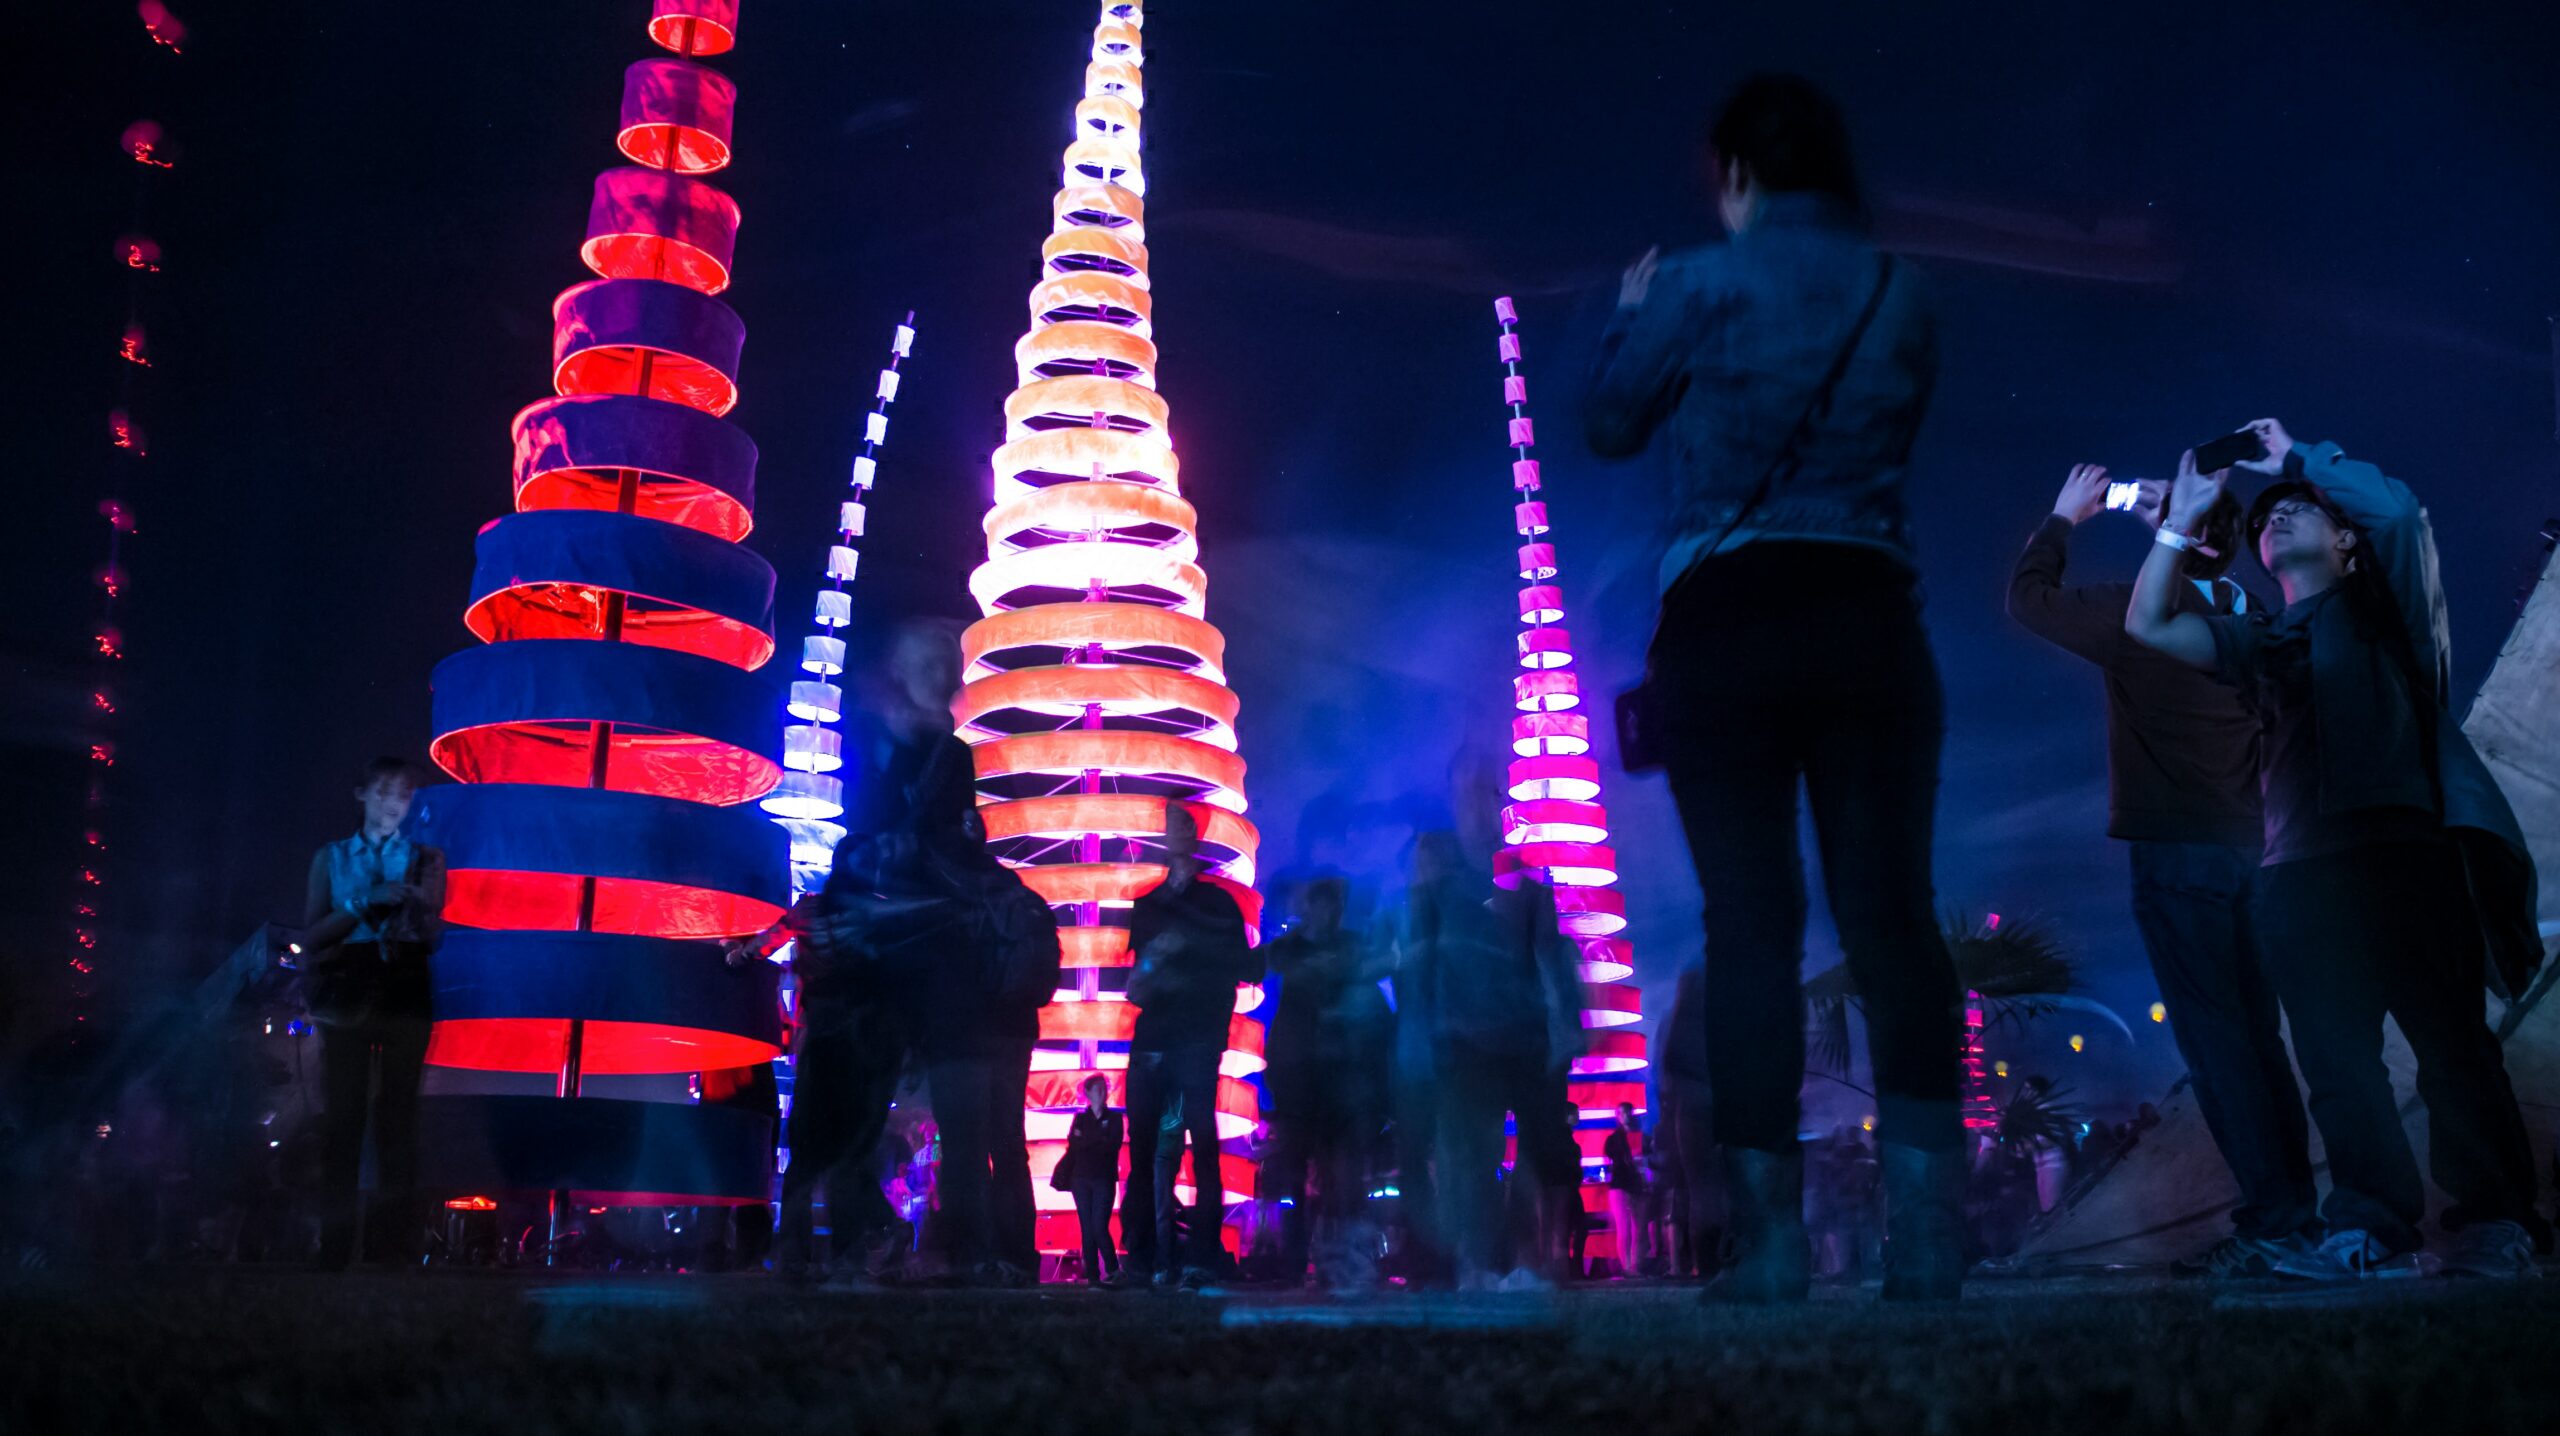 Check out some popular things to do inside of the Coachella festival.
pictured: a night at Coachella with bright glowing decor and attendees taking pictures 